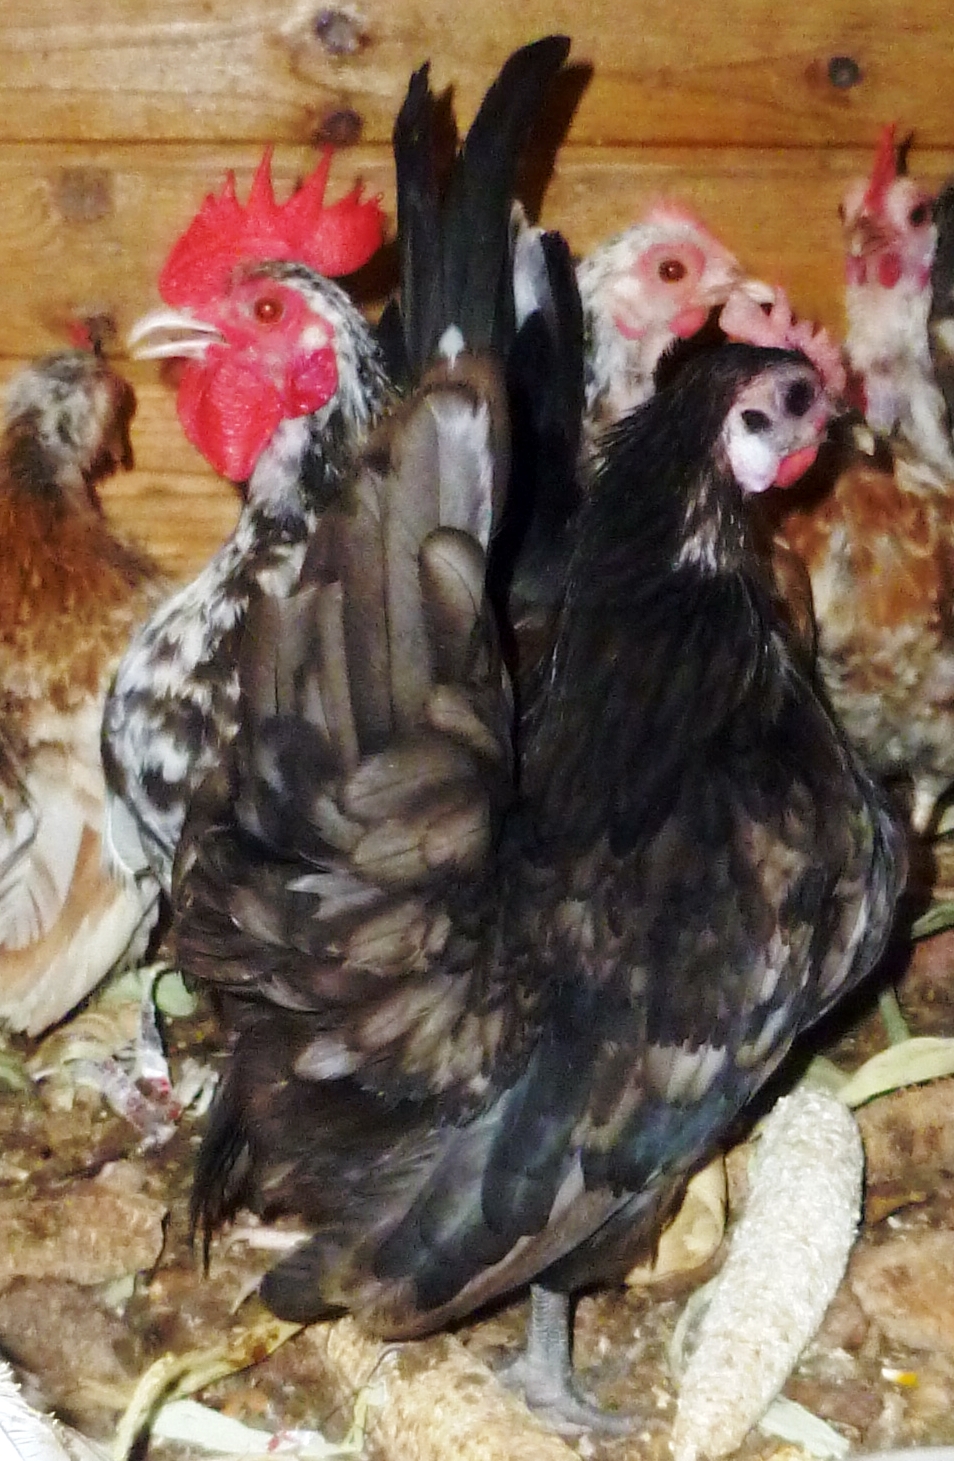 The roo is Micro class and reproduces, here is one of his hens, and she also reproduces, we are striving for 7-12 ounce birds only